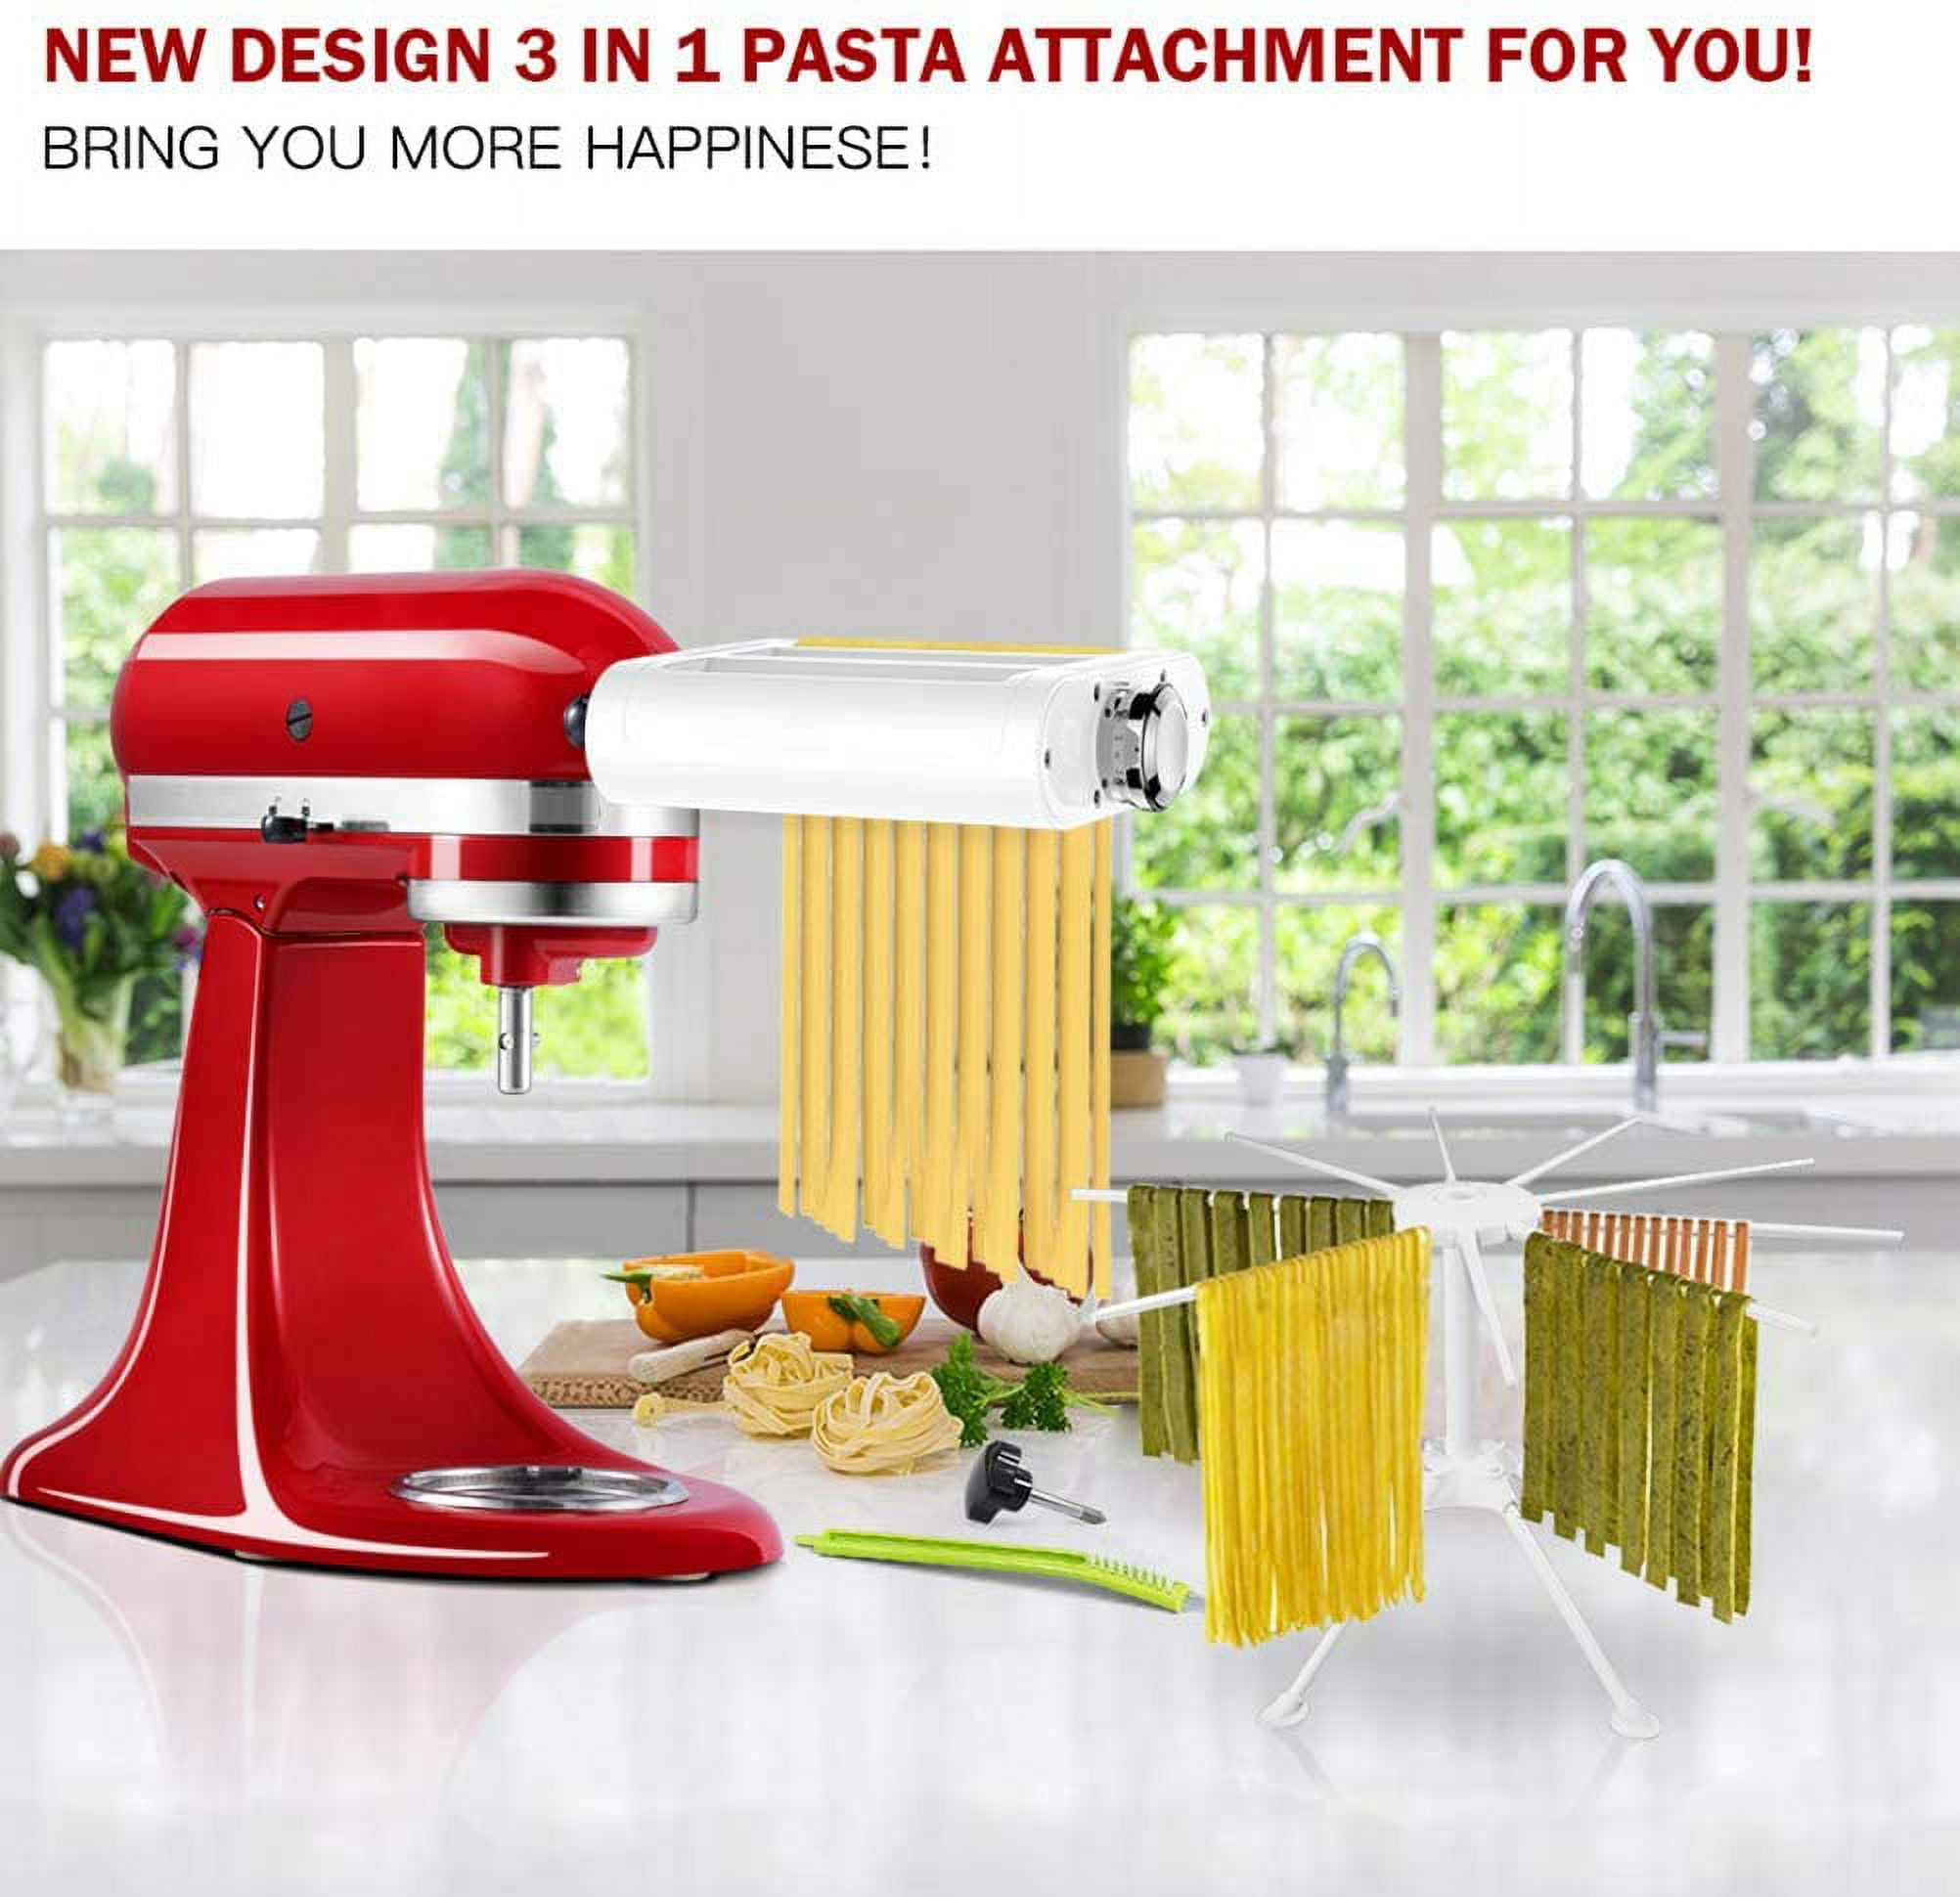 Antree Pasta Maker Attachment 3 in 1 Set for KitchenAid Stand